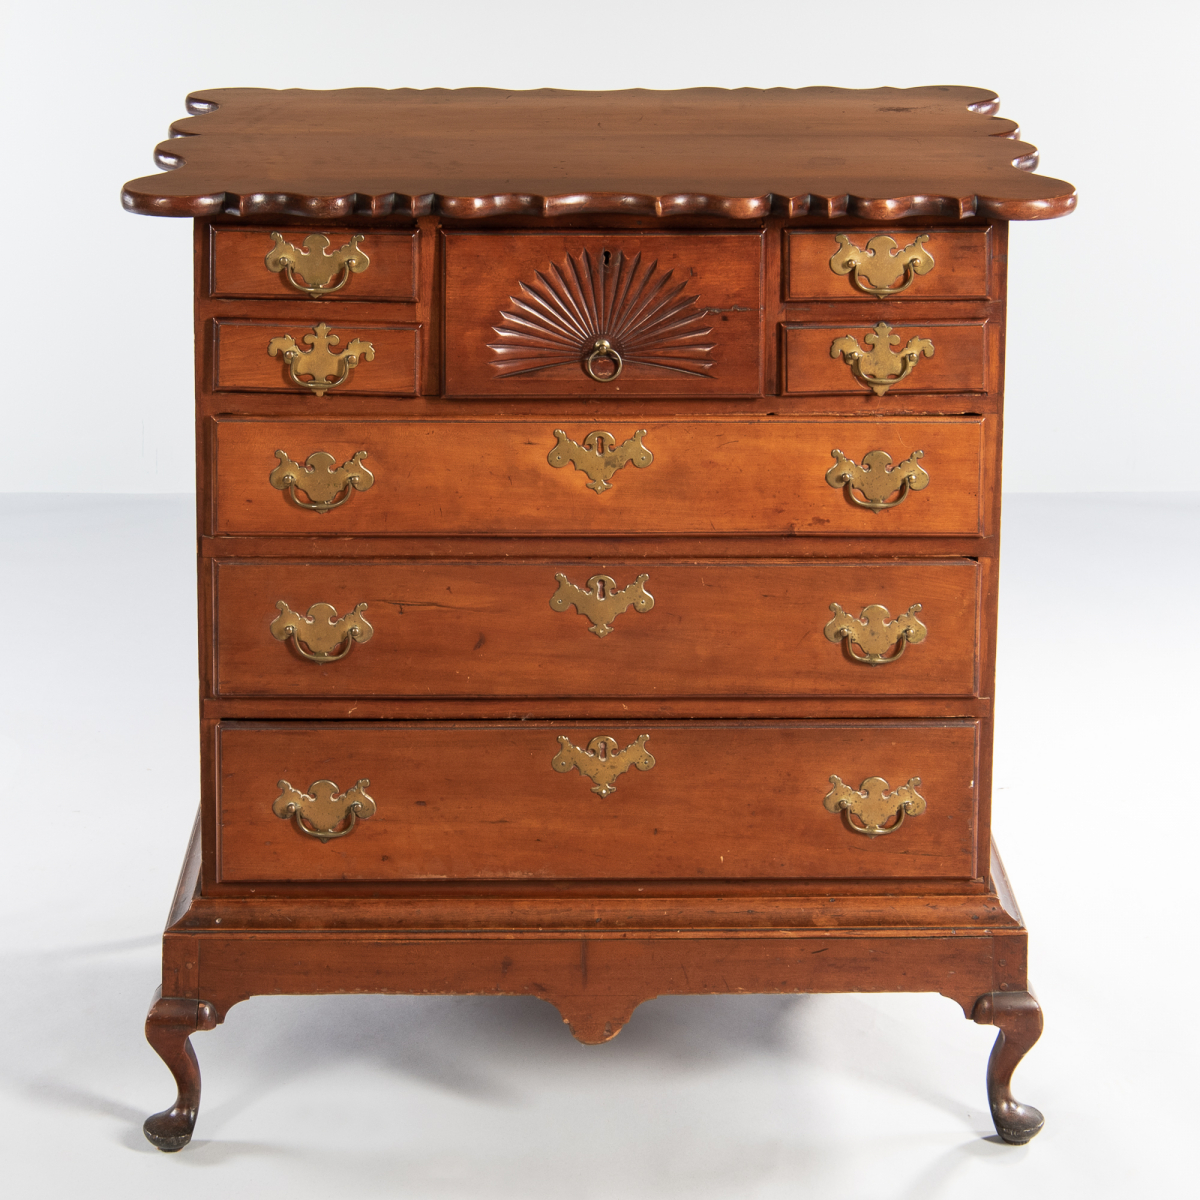 Cherry Chest of Drawers on Frame, Deerfield, Massachusetts, area, late 18th century